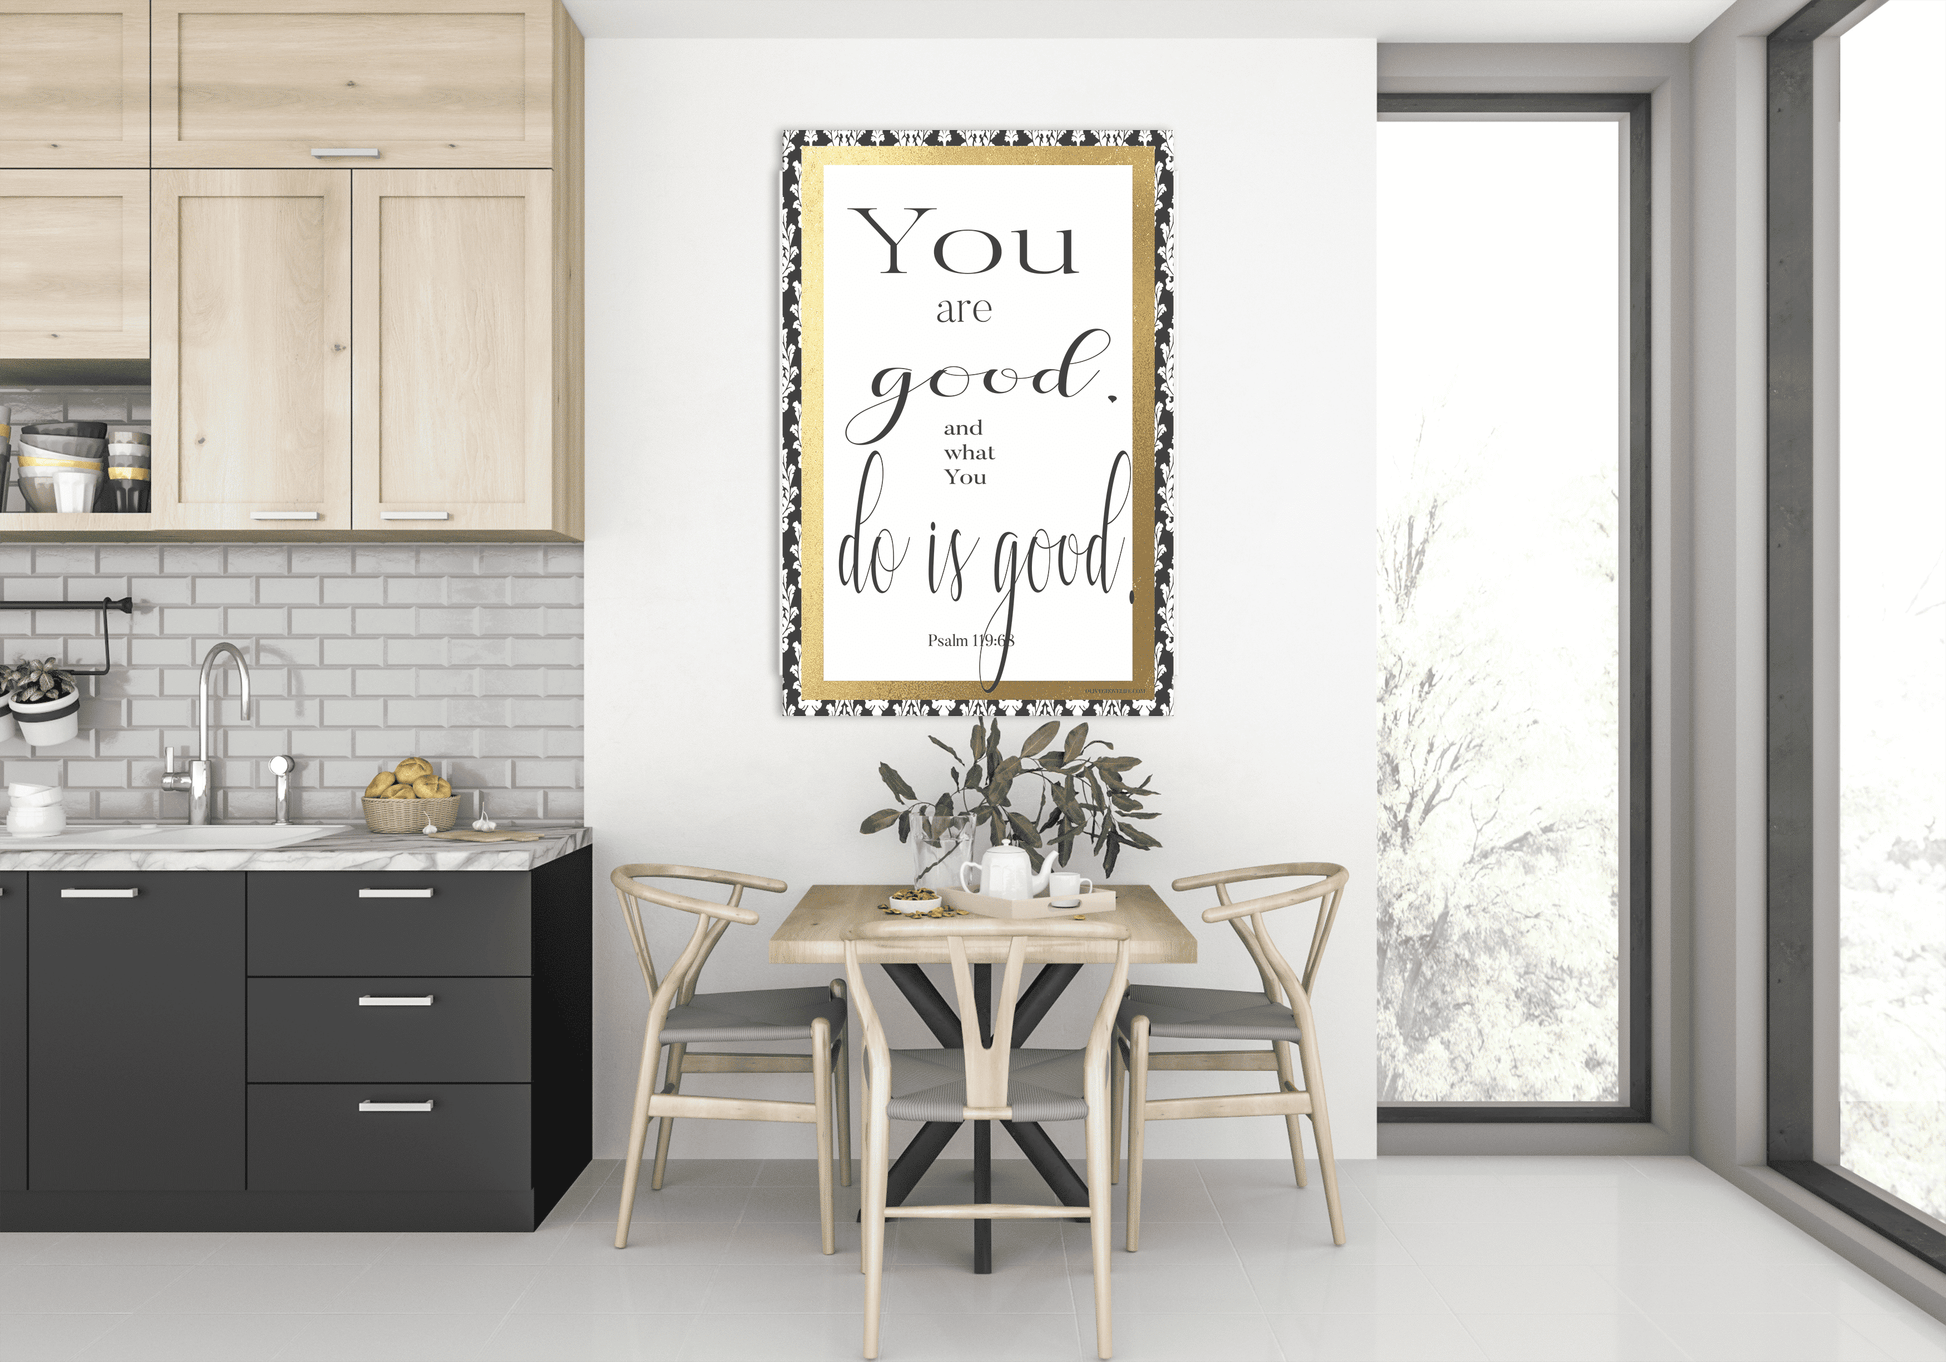 Psalm 119:68 Art Print - in kitchen/dining room over small table